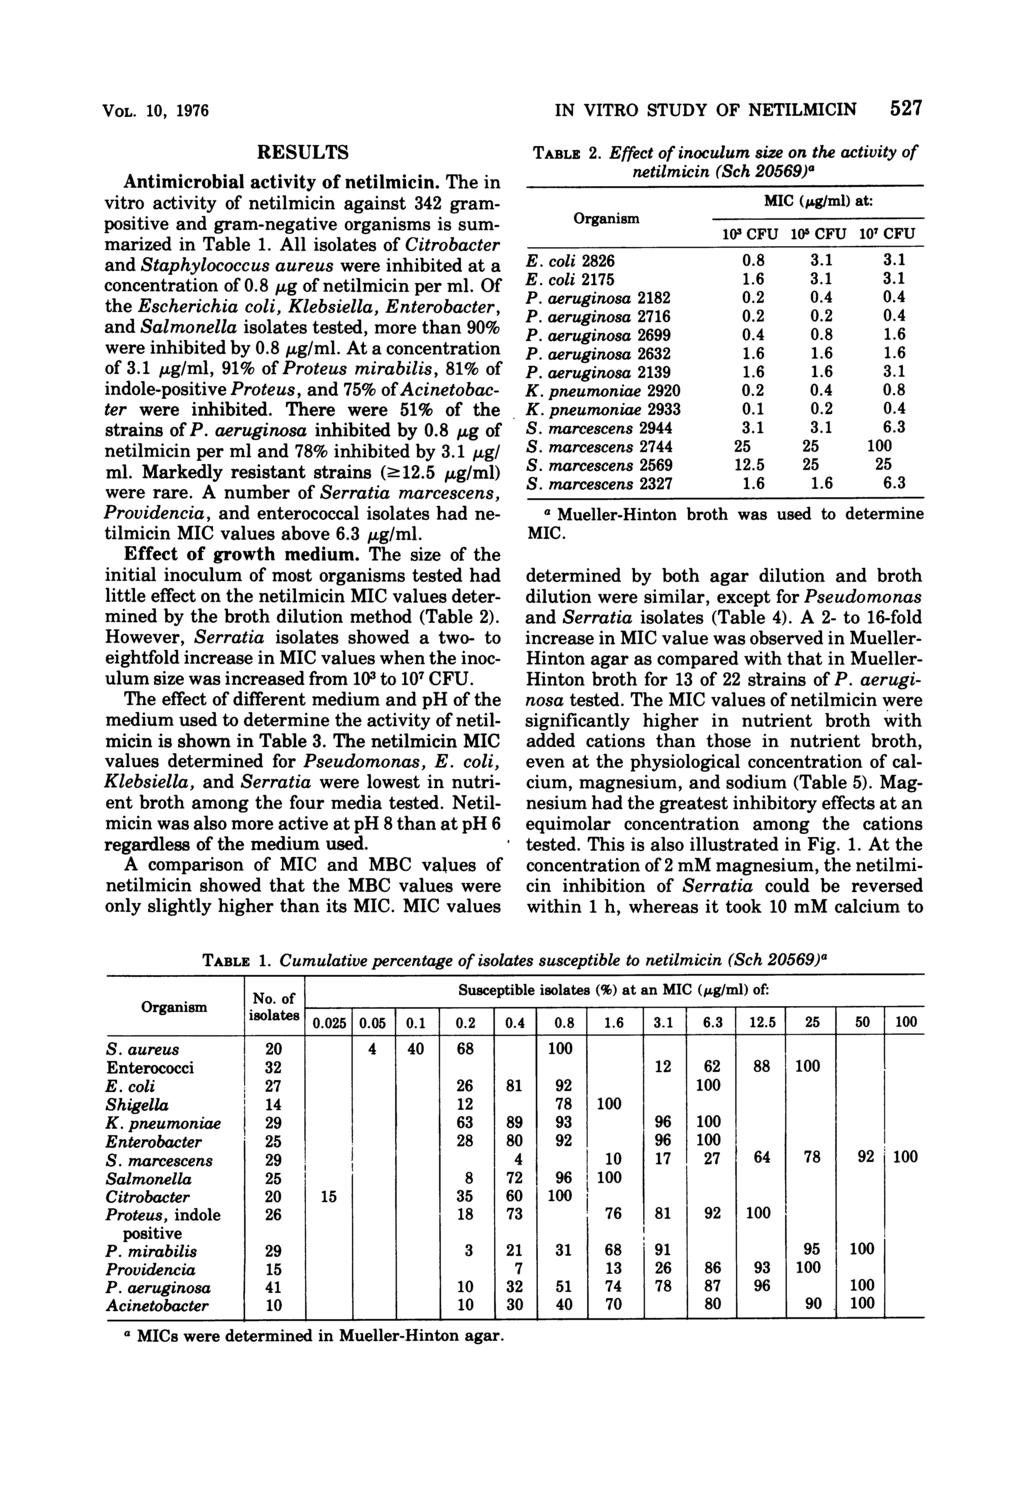 VOL. 10, 1976 RESULTS Antimicrobial activity of netilmicin. The in vitro activity of netilmicin against 342 grampositive and gram-negative organisms is summarized in Table 1.